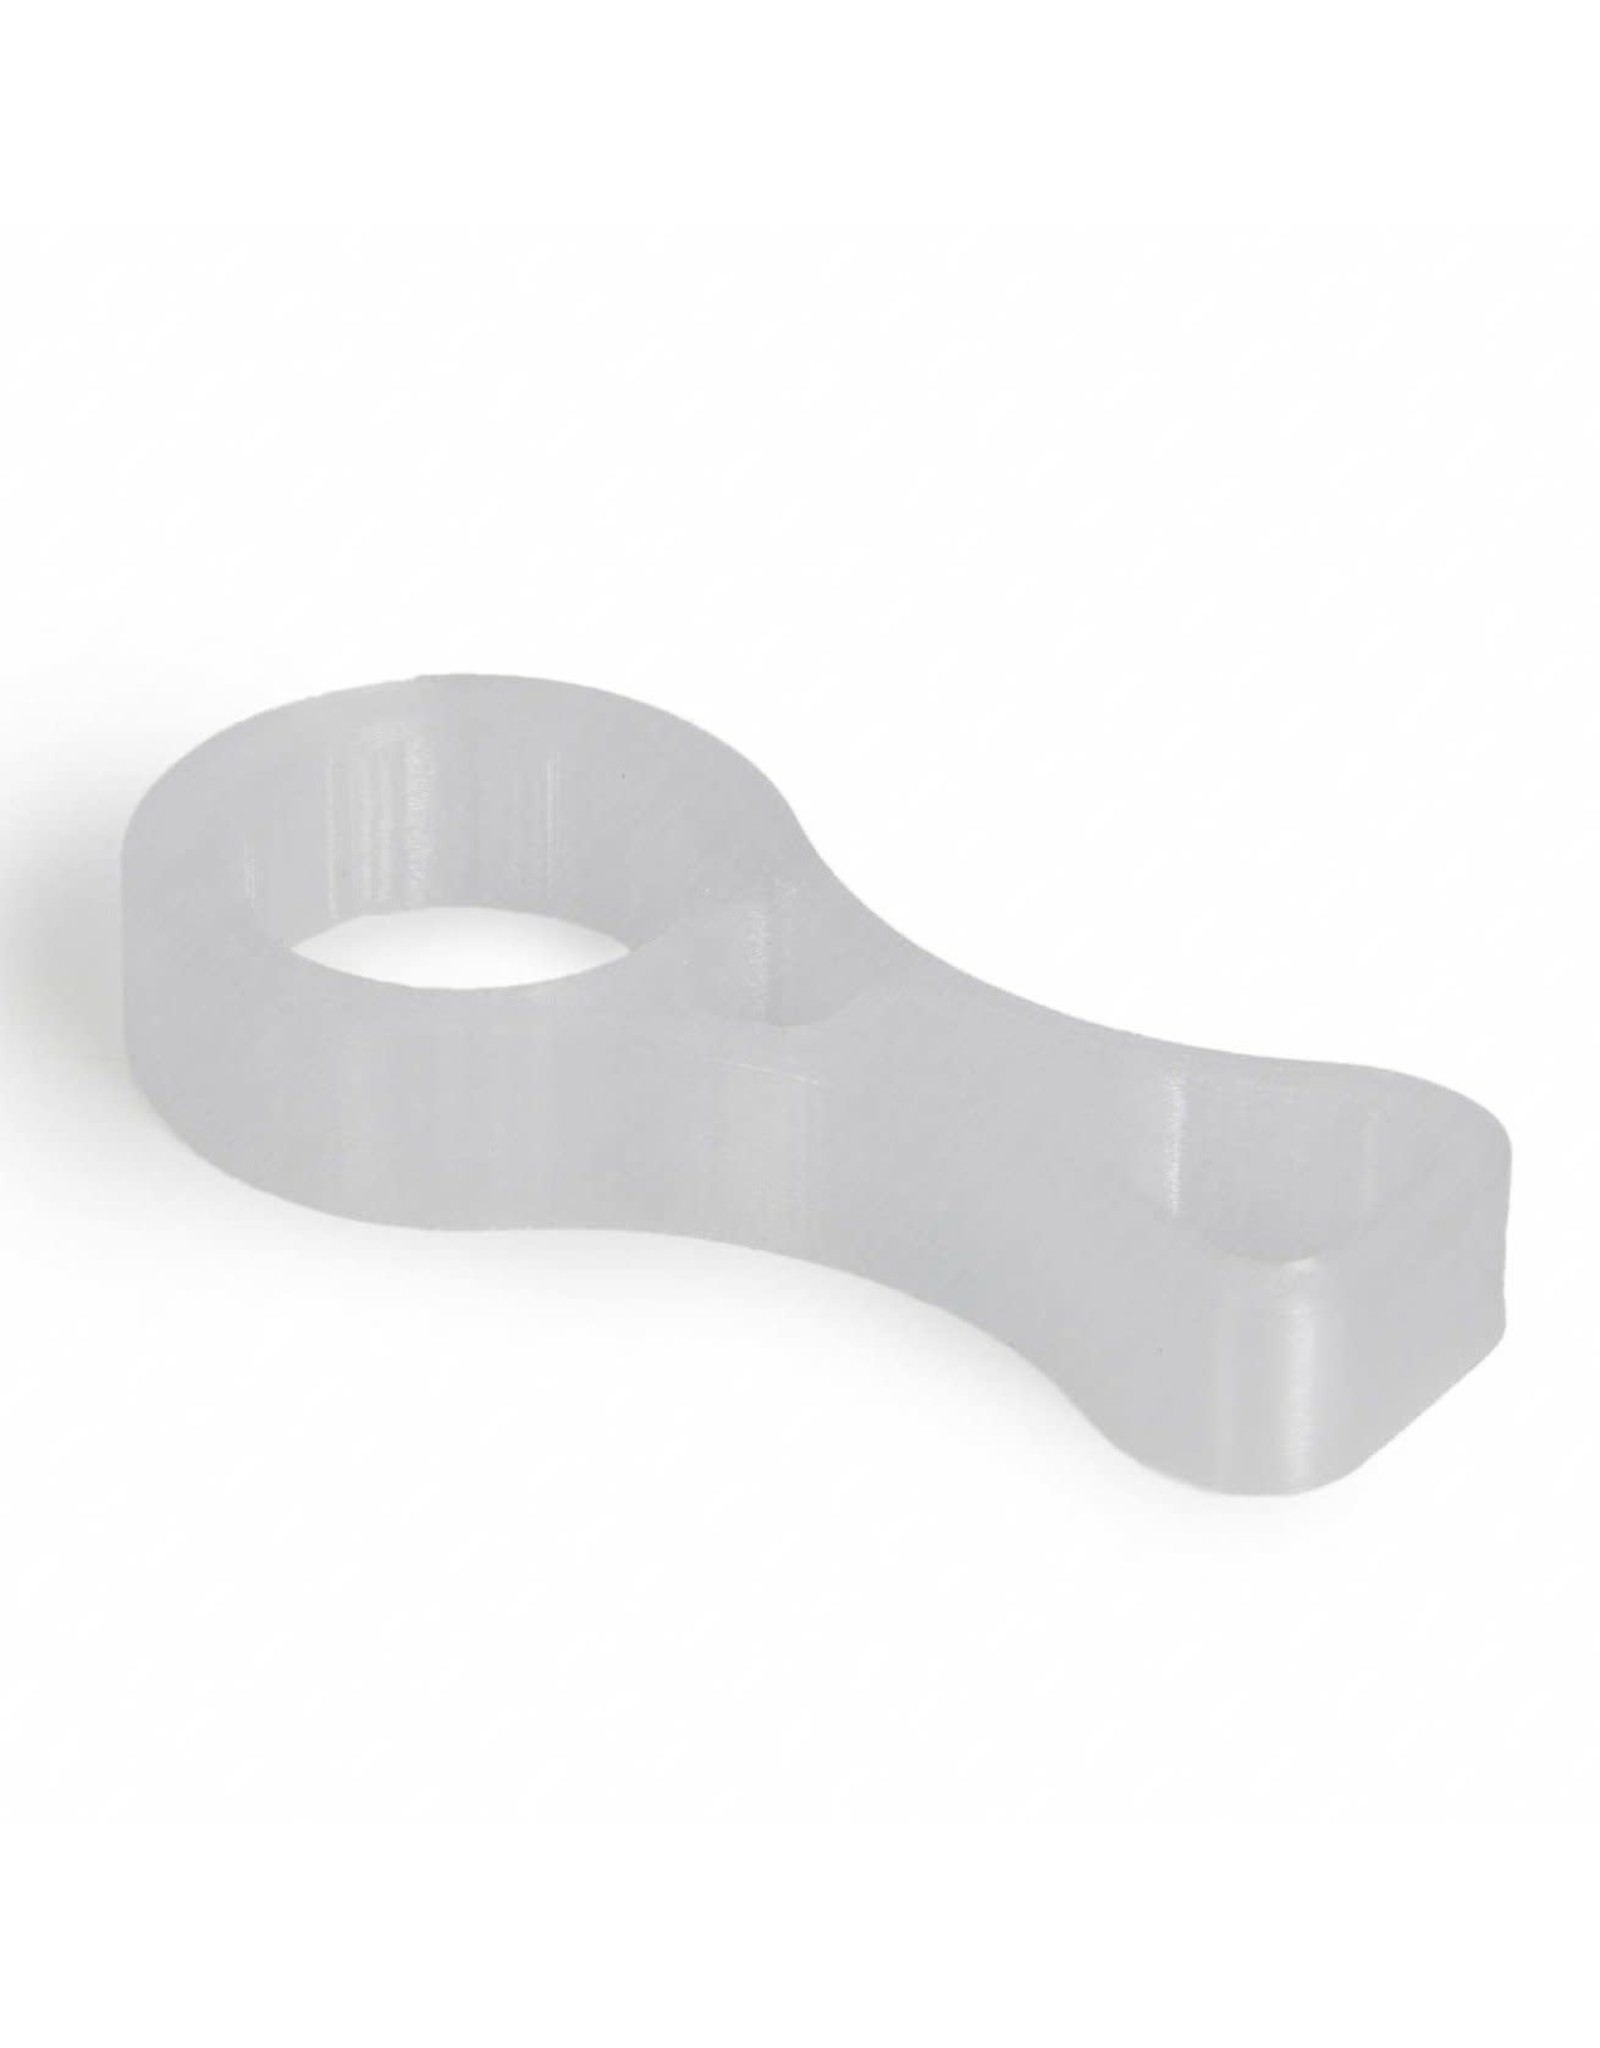 Baader Planetarium Baader 3D-printed ring-wrench for Baader Pan EQ- clamps